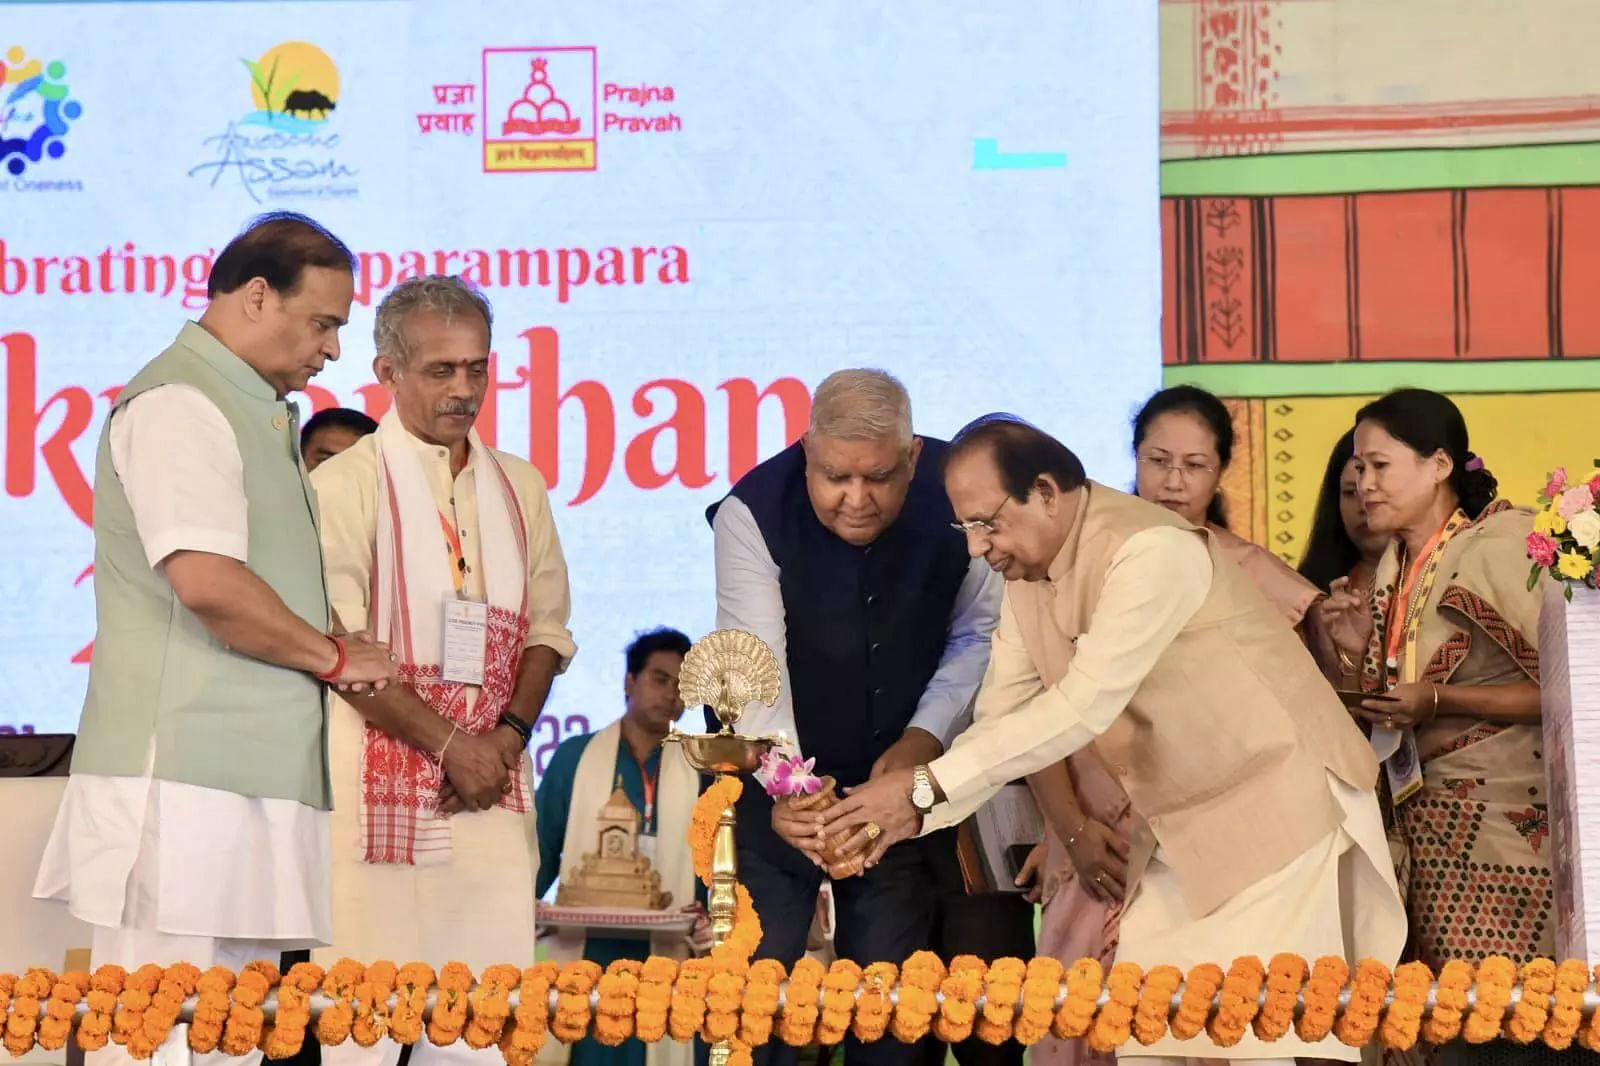 Assam: VP at Lokmanthan 2022, Stresses Discussion and Dialogue in Public Realm